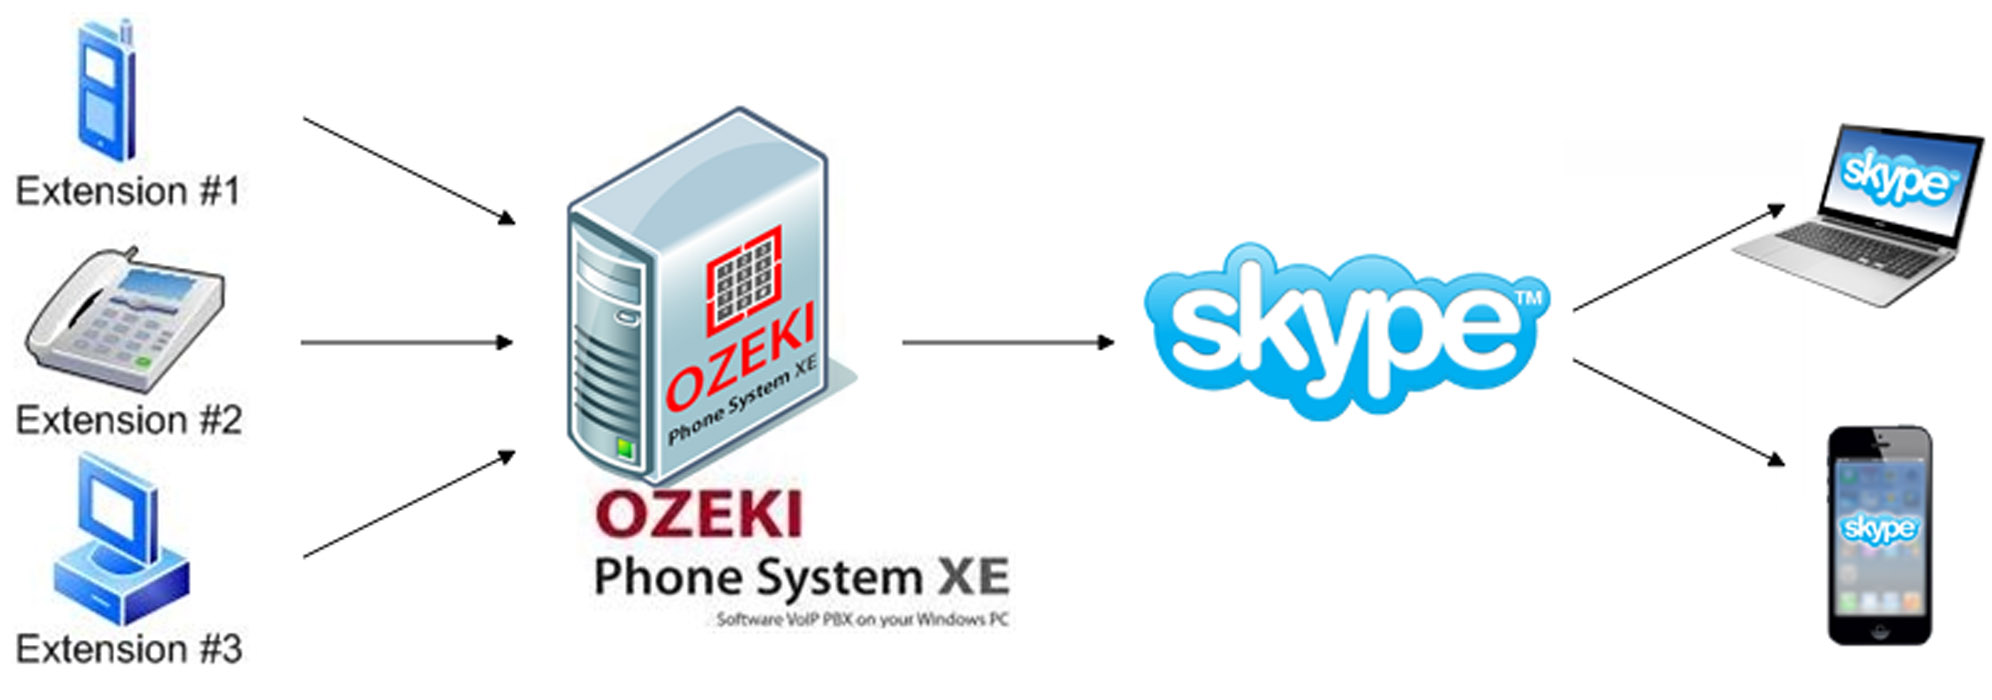 voip calls from ozeki phone system to telephones via skype connect